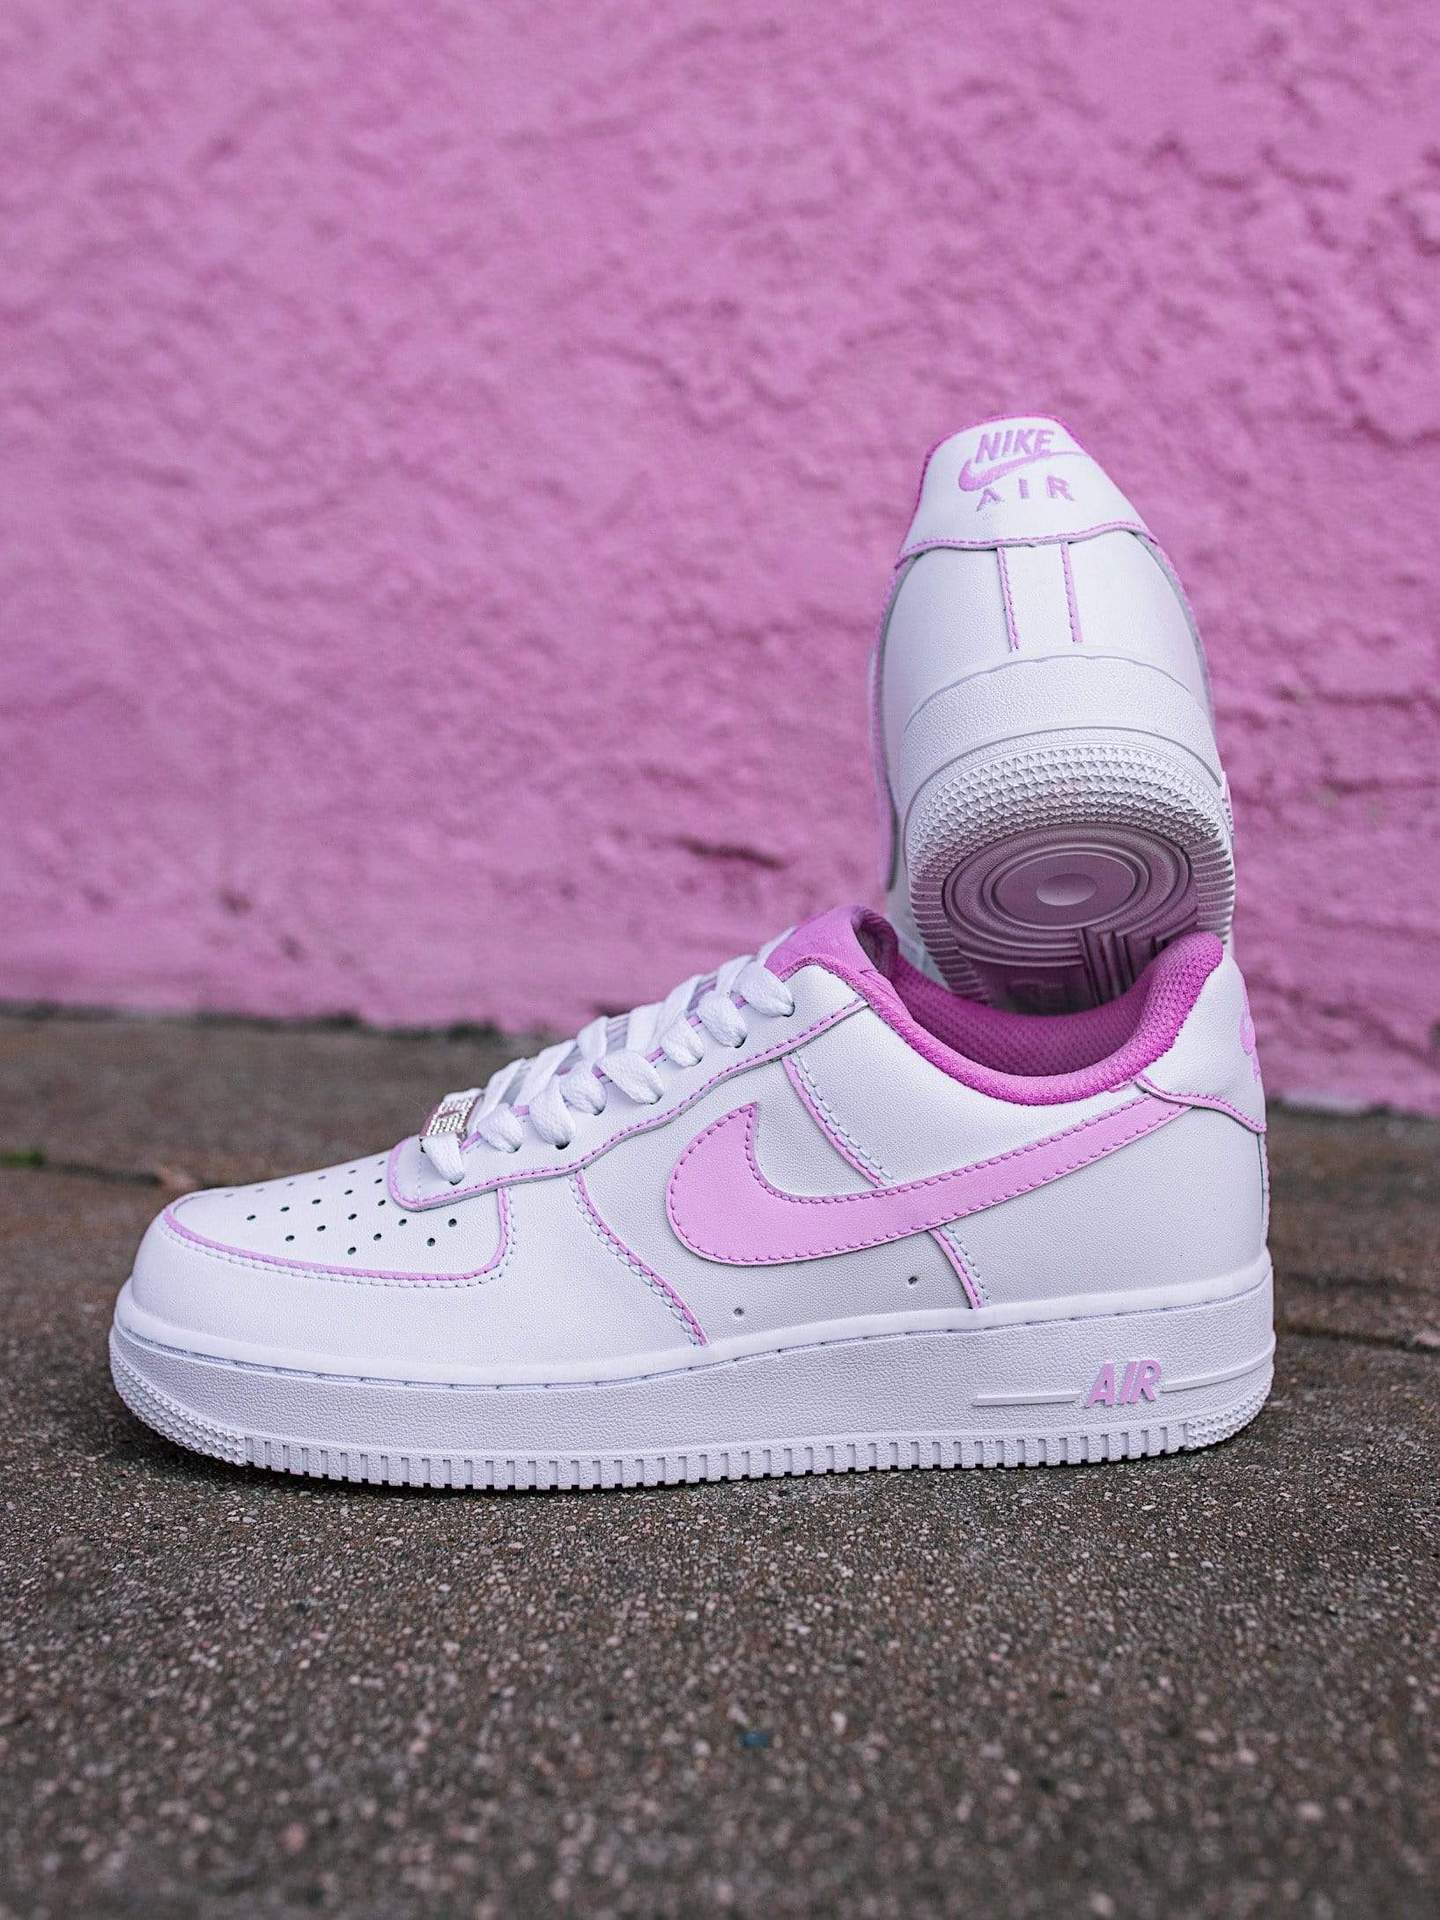 Moody Mood Collection AF1 Pink Outline Air Force 1